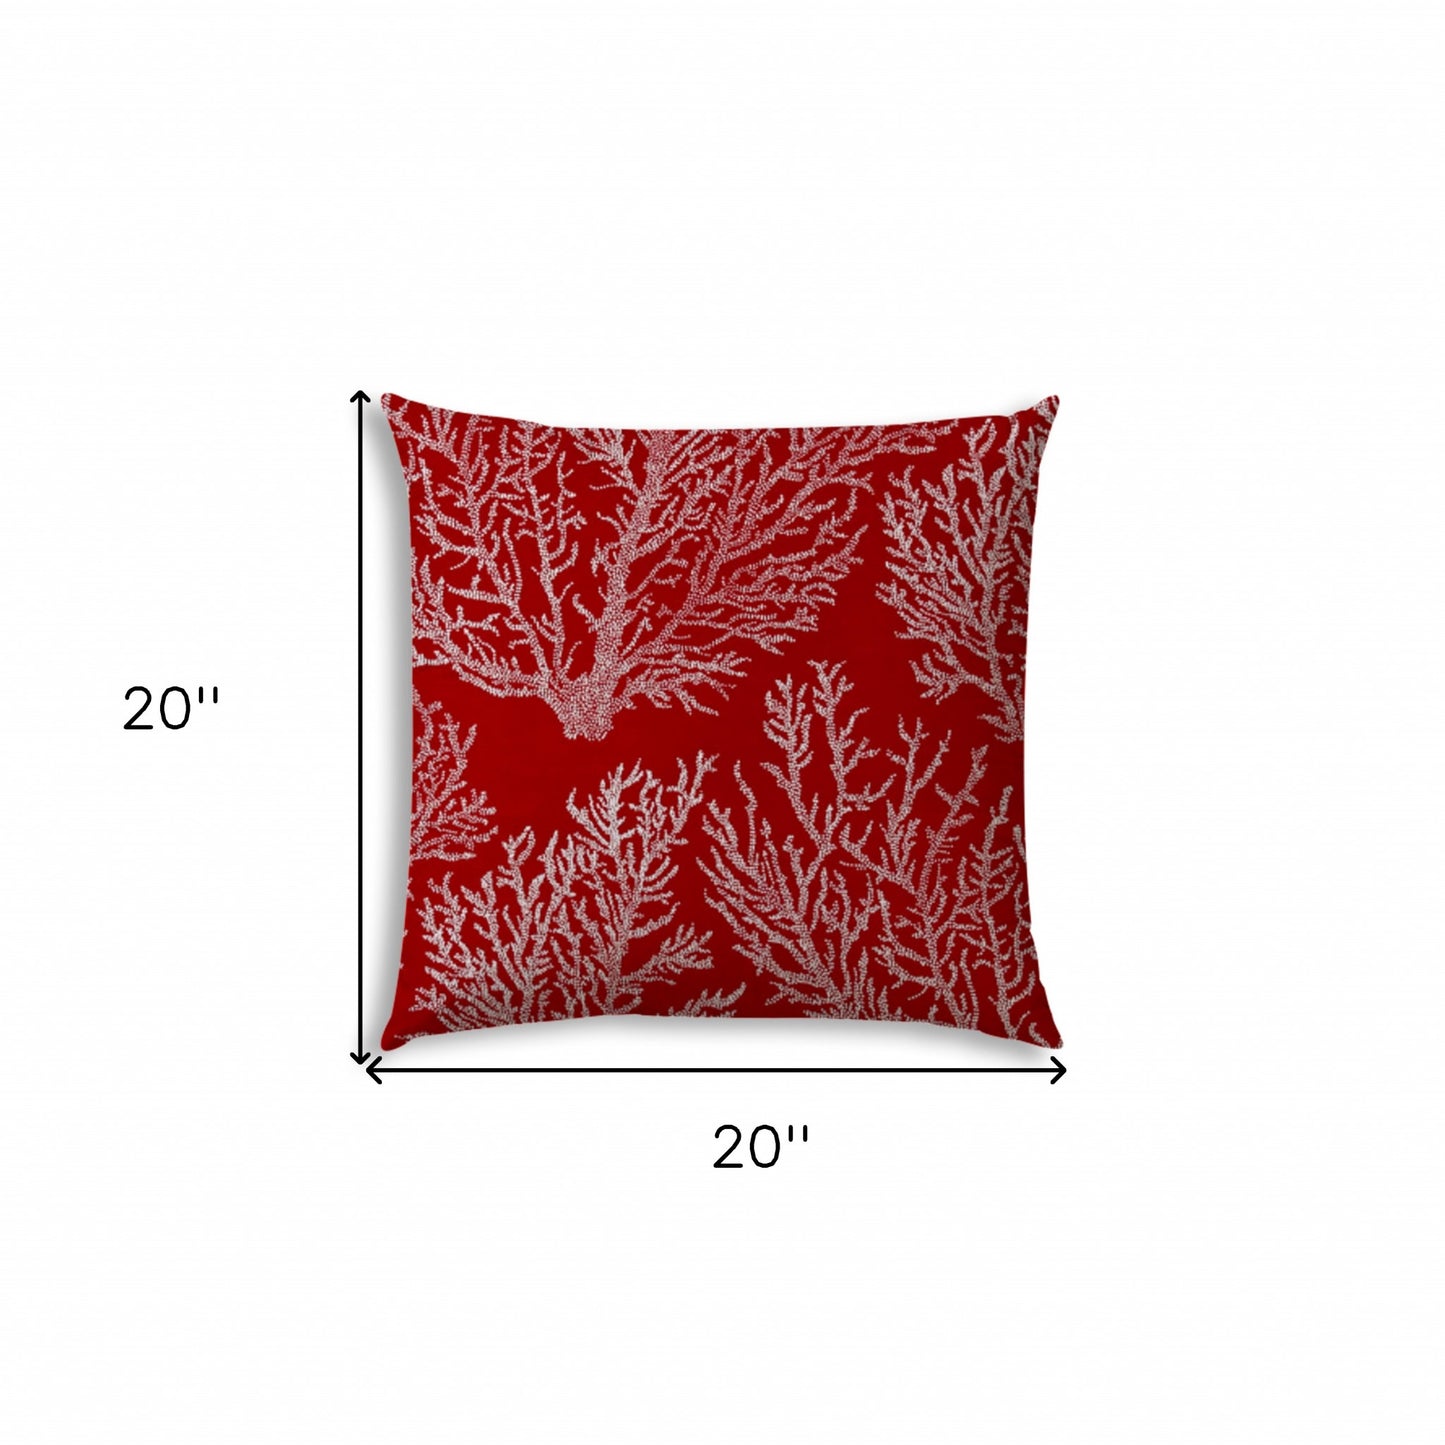 20" X 20" Red And White Corals Blown Seam Coastal Throw Indoor Outdoor Pillow